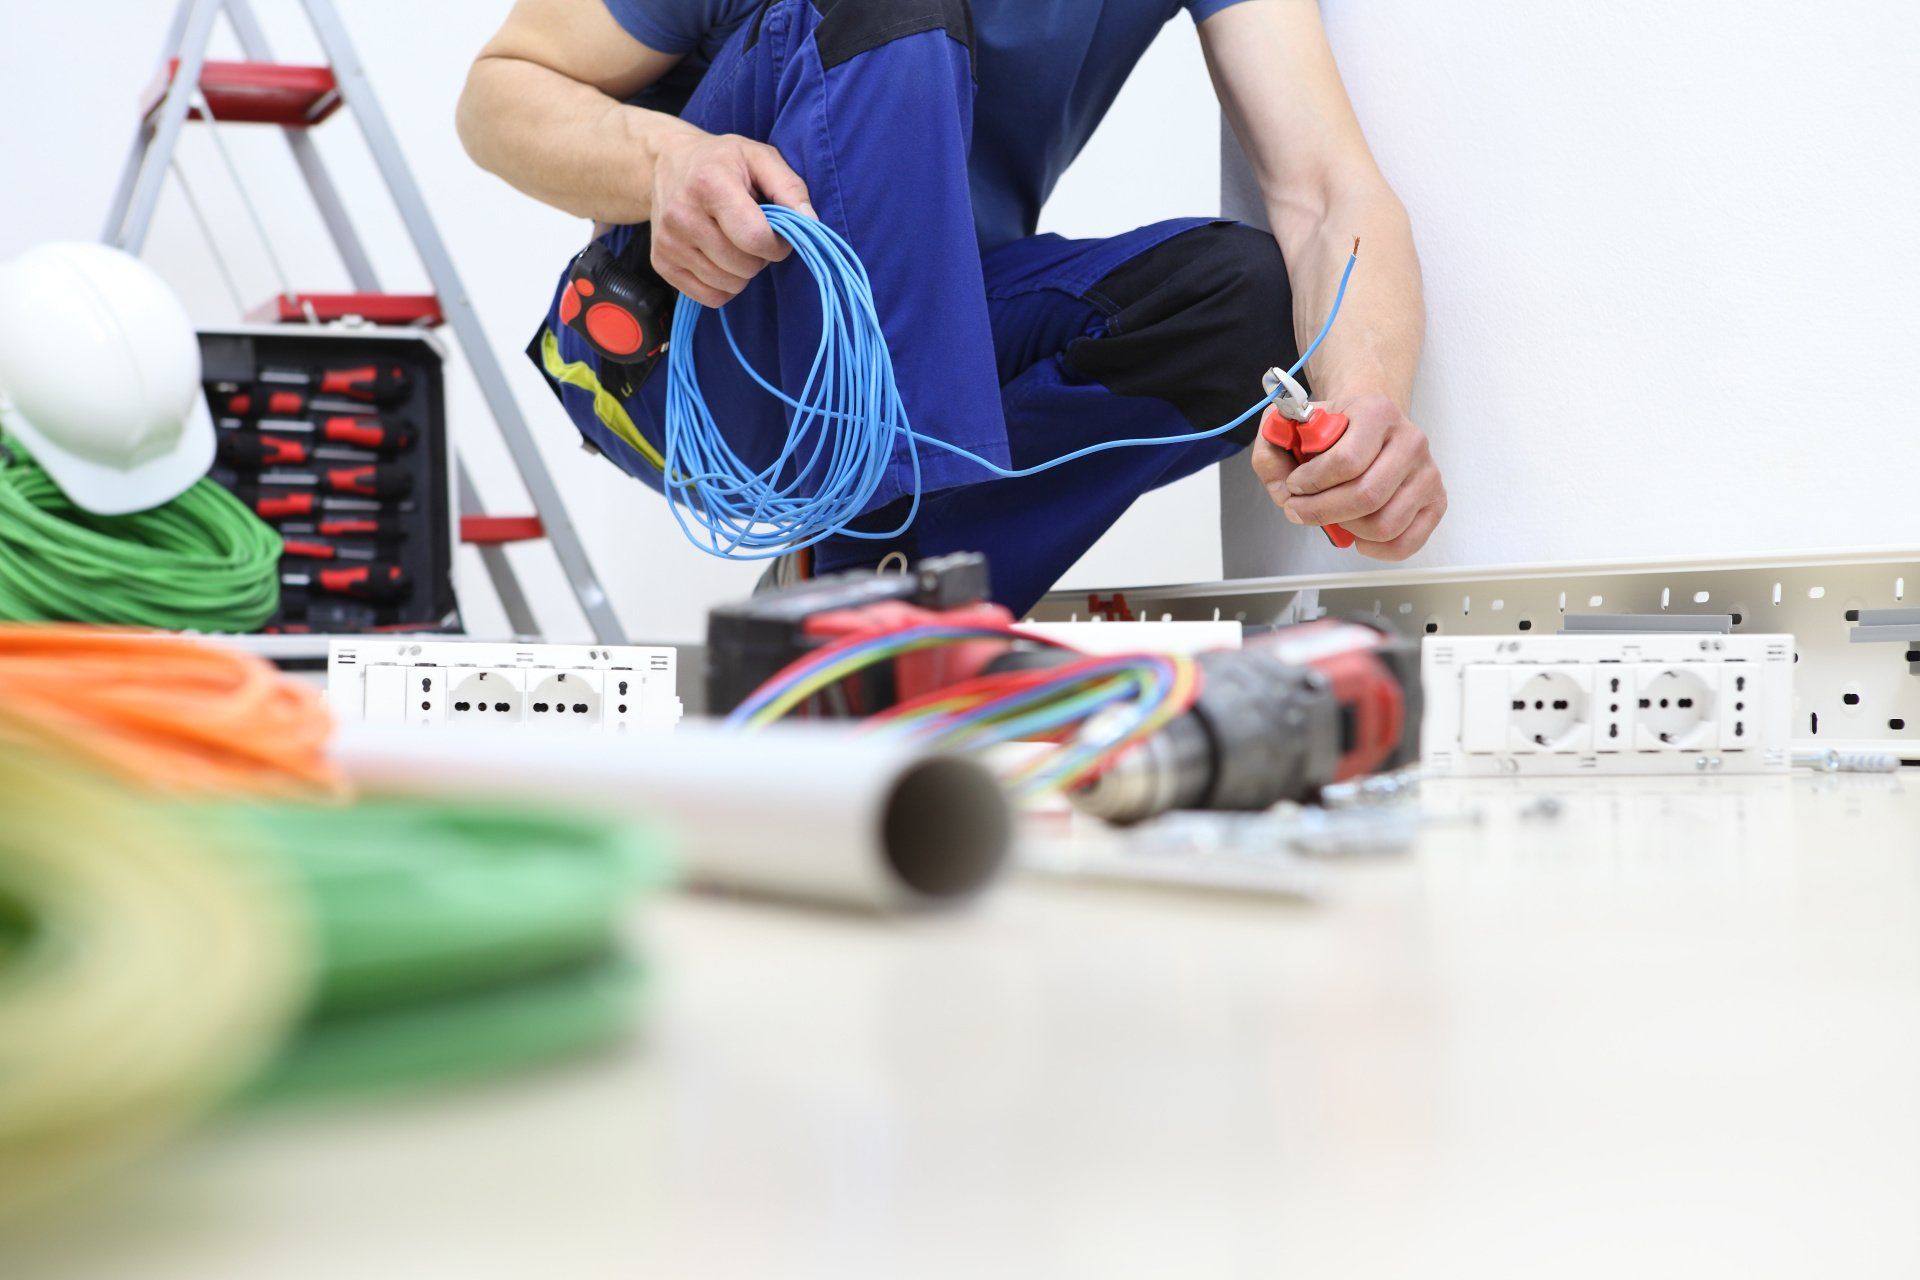 Electrician using nippers to cut electric cable for installation of electric circuits and wiring.